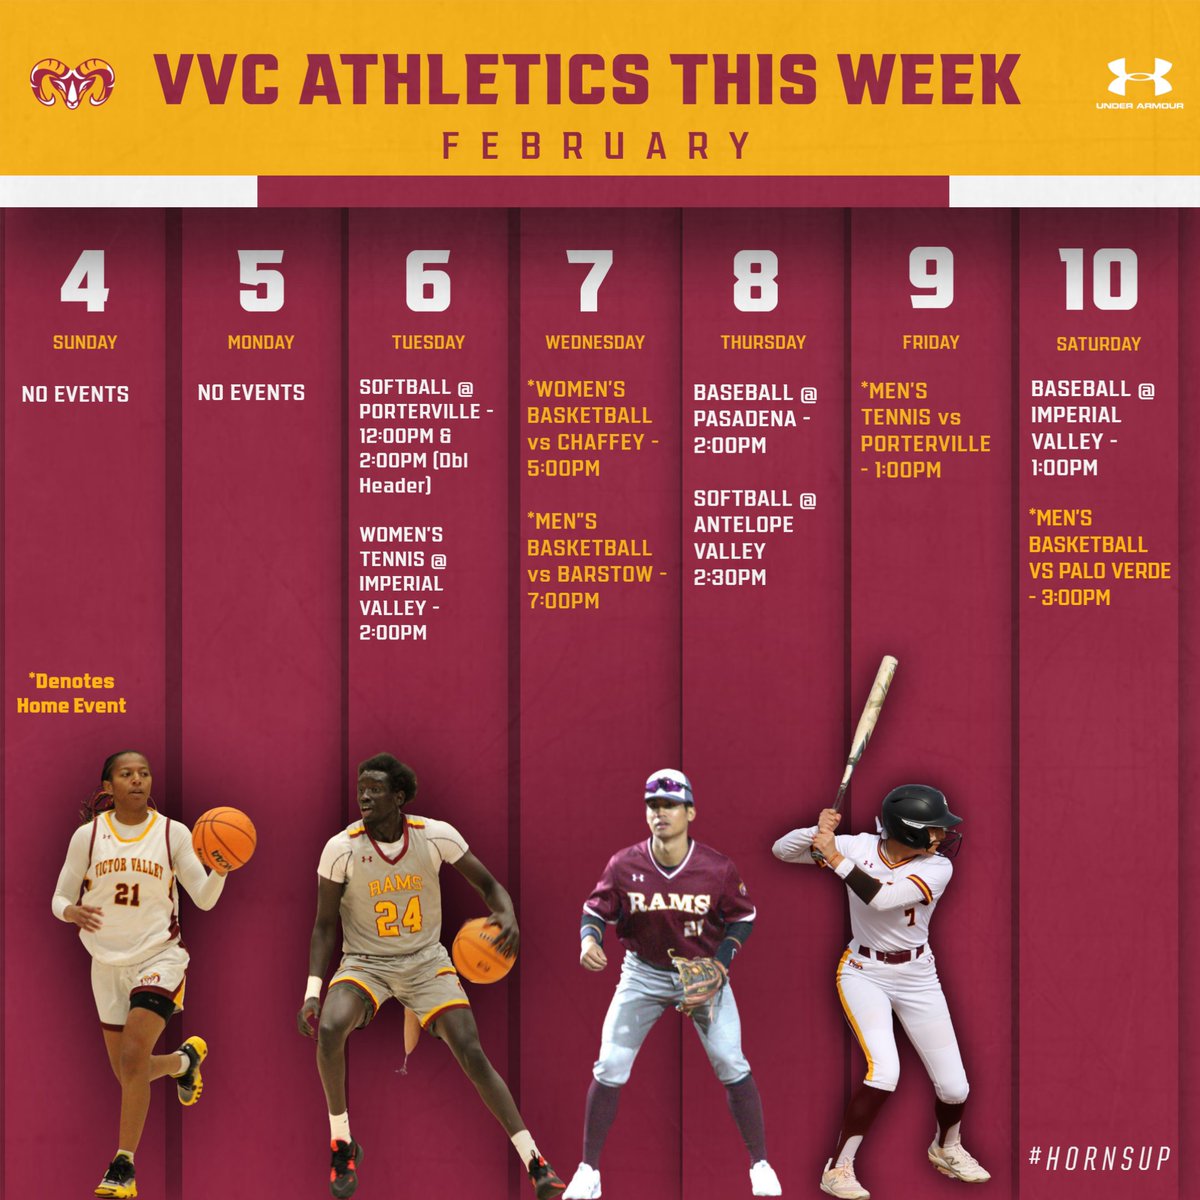 Check out what is going on in VVC Athletics this week! Stay connected with us each week as we inform you on our games and events. . . . #VVC I #Athletics I #RAMS I #vvcathletics | #GoRams I #GoVVC I #hornsup🤘